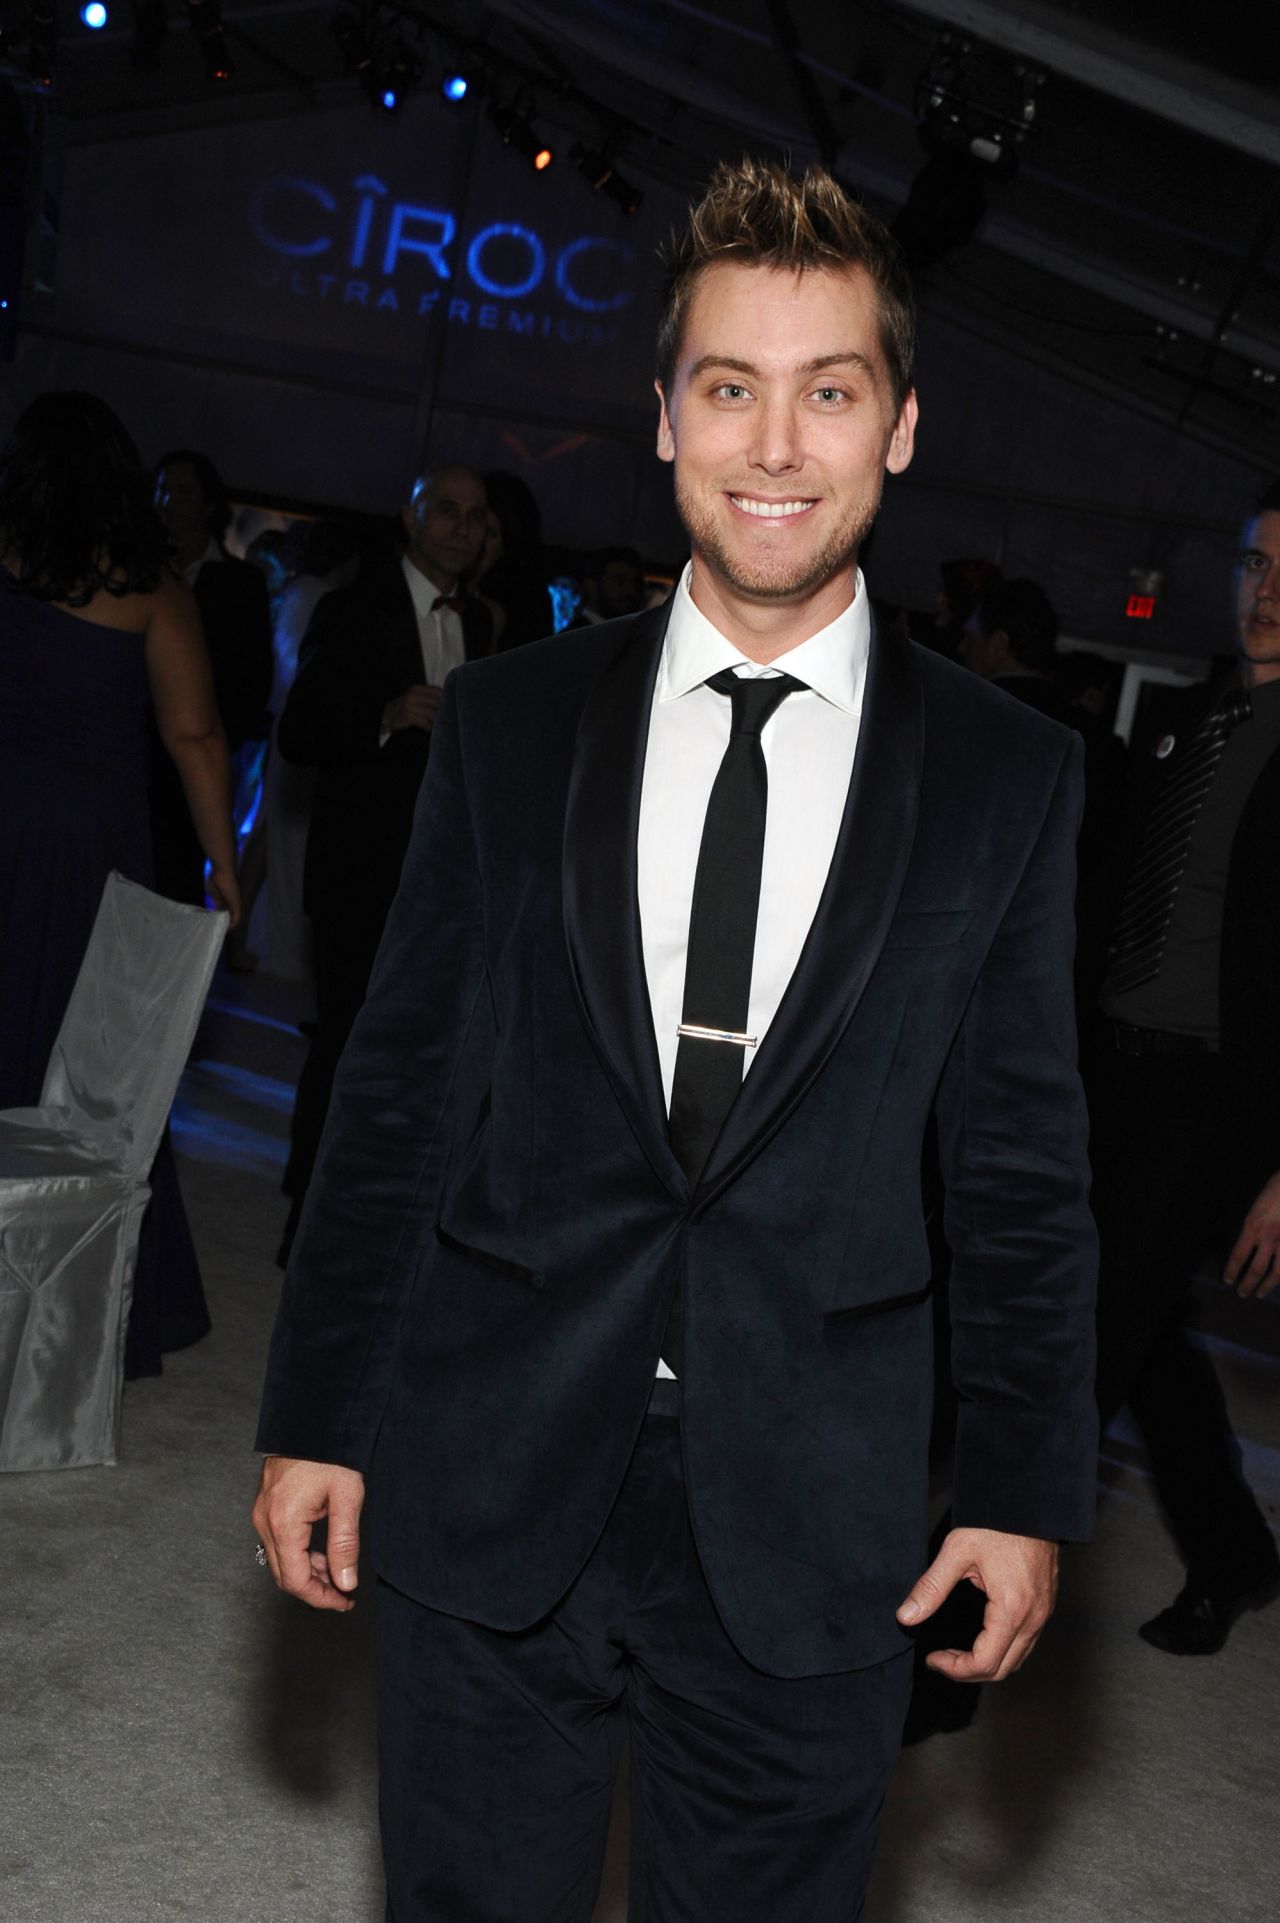 'NSync singer Lance Bass appeared on the cover of People in August 2006 with the headline "I'm Gay." "I knew that I was in this popular band and I had four other guys' careers in my hand, and I knew that if I ever acted on it or even said (that I was gay), it would overpower everything," Bass told the magazine in explaining why he didn't come out sooner. 